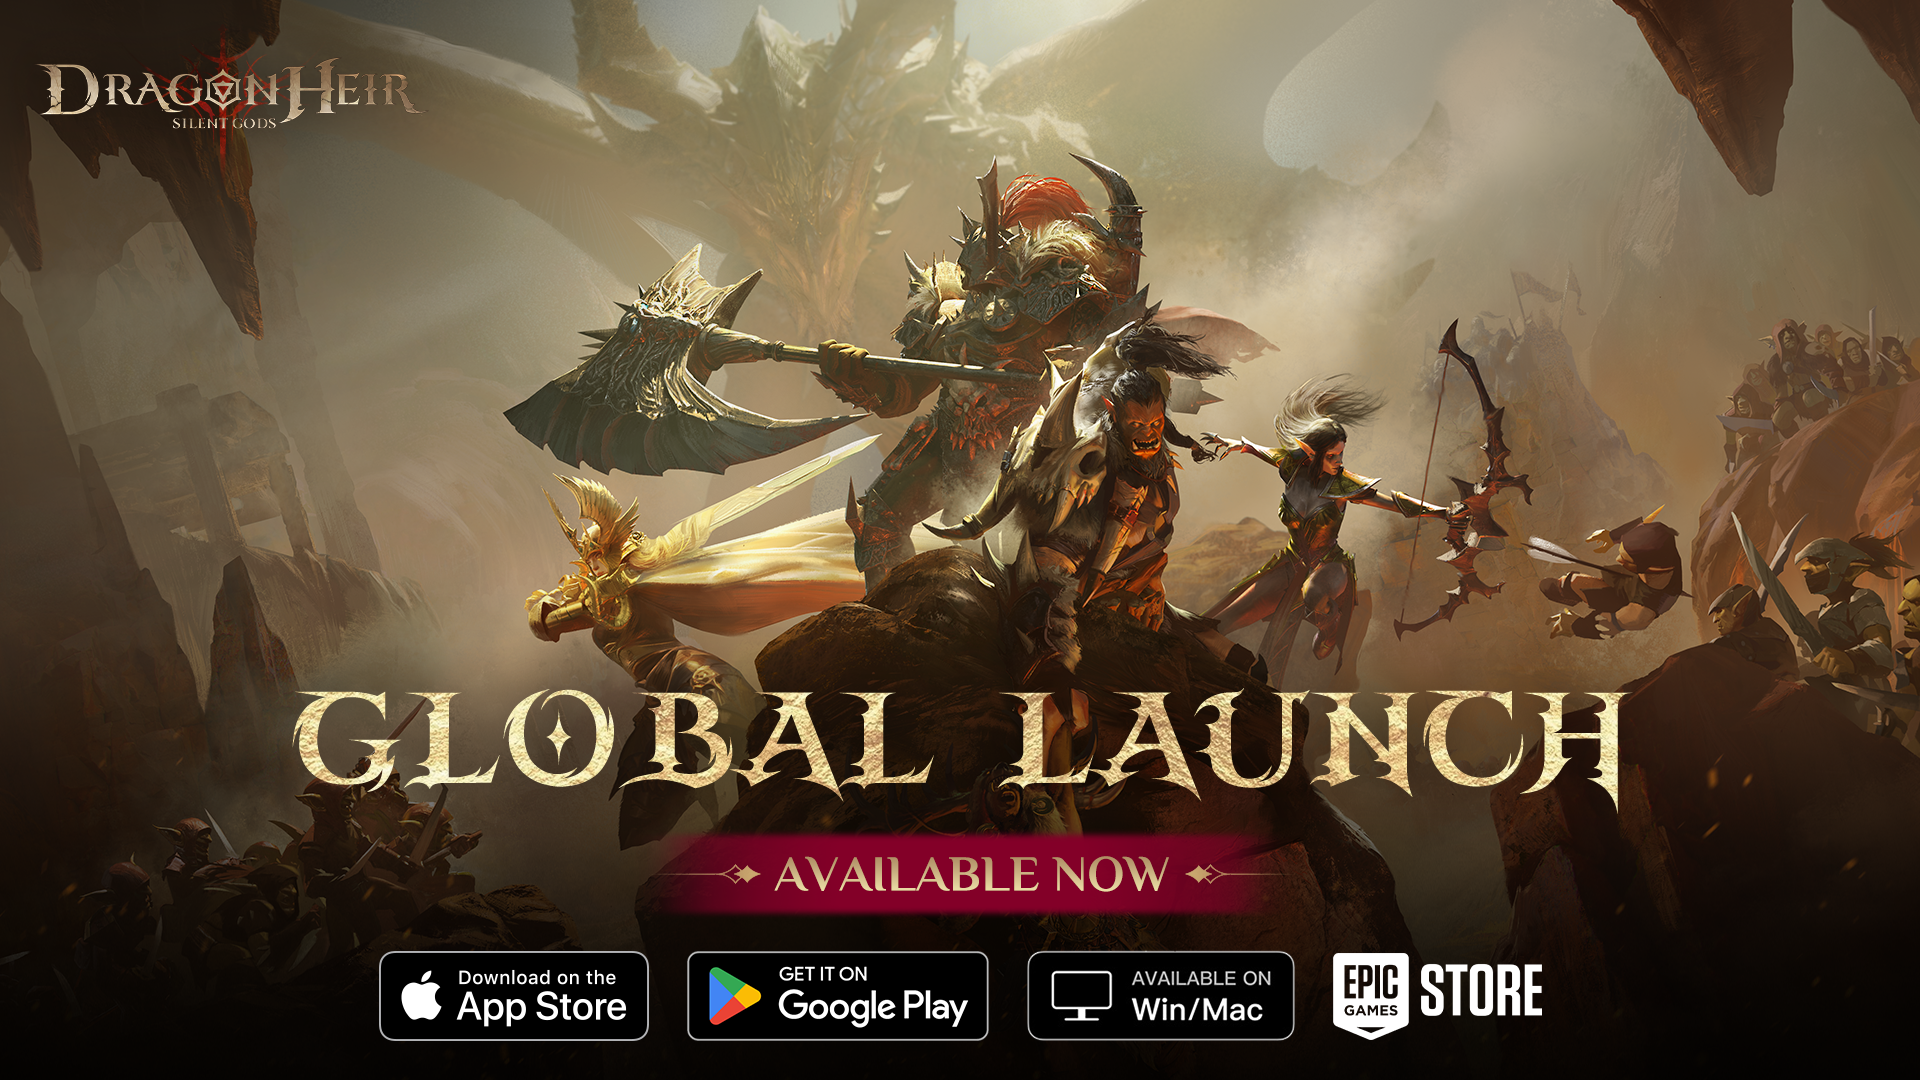 Against All Odds  Download and Buy Today - Epic Games Store